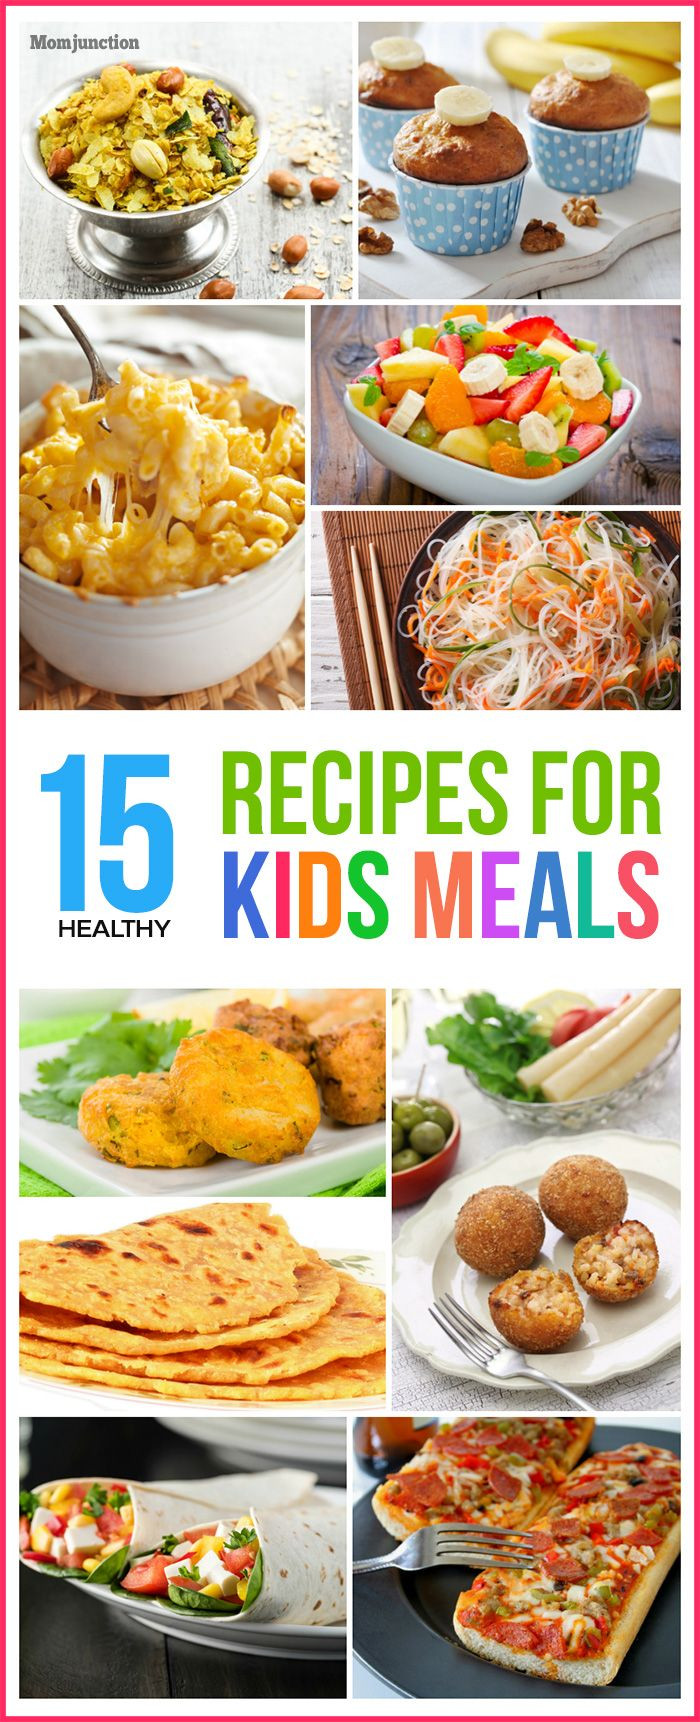 Good Recipes For Kids
 Top 15 Healthy Recipes For Kids Meals